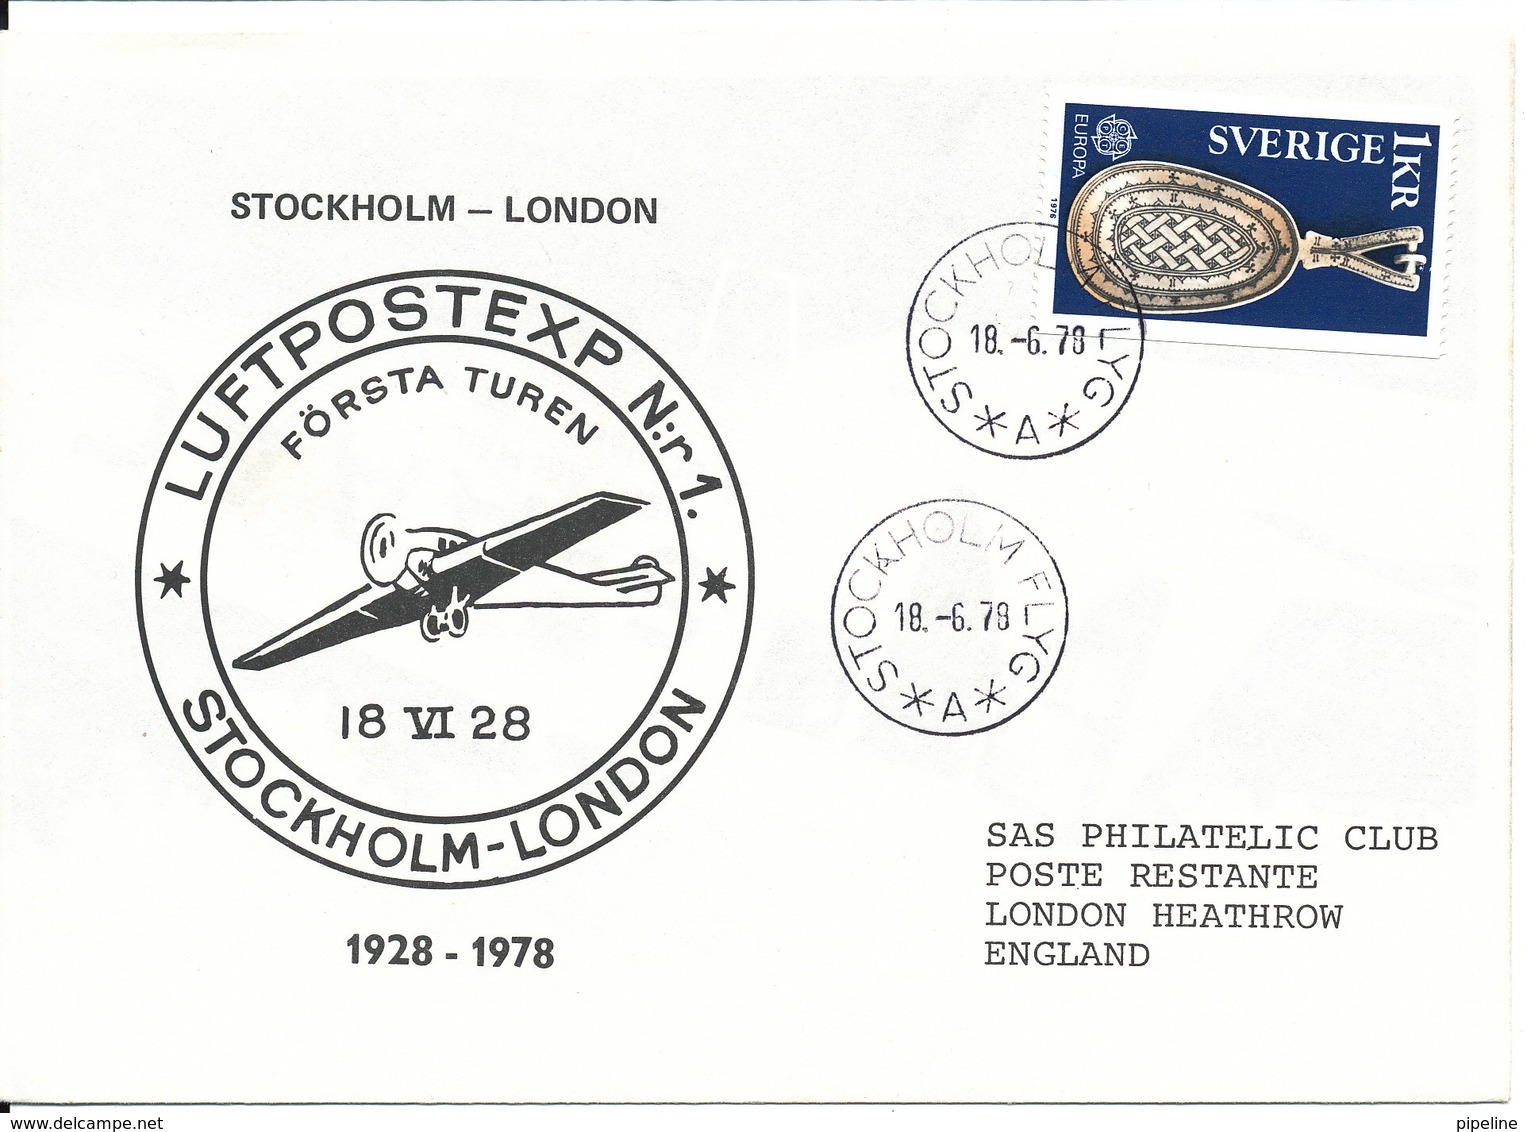 Sweden Flight Cover 18-6-1978 50th Anniversary For The First Flight Stockholm - London 18-6-1928 - Covers & Documents